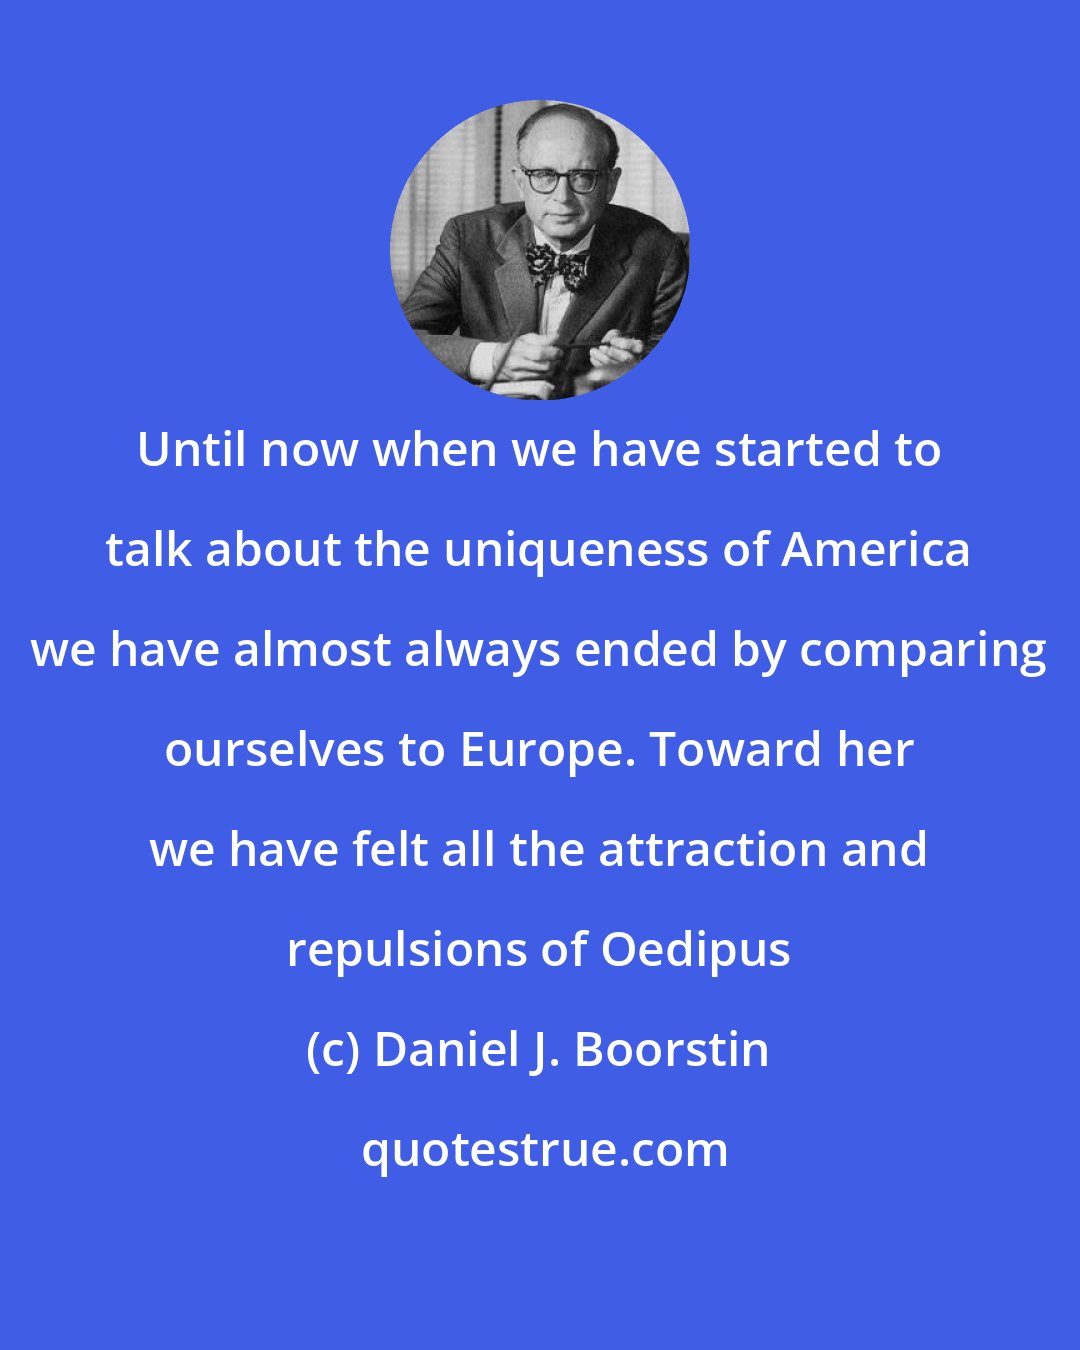 Daniel J. Boorstin: Until now when we have started to talk about the uniqueness of America we have almost always ended by comparing ourselves to Europe. Toward her we have felt all the attraction and repulsions of Oedipus